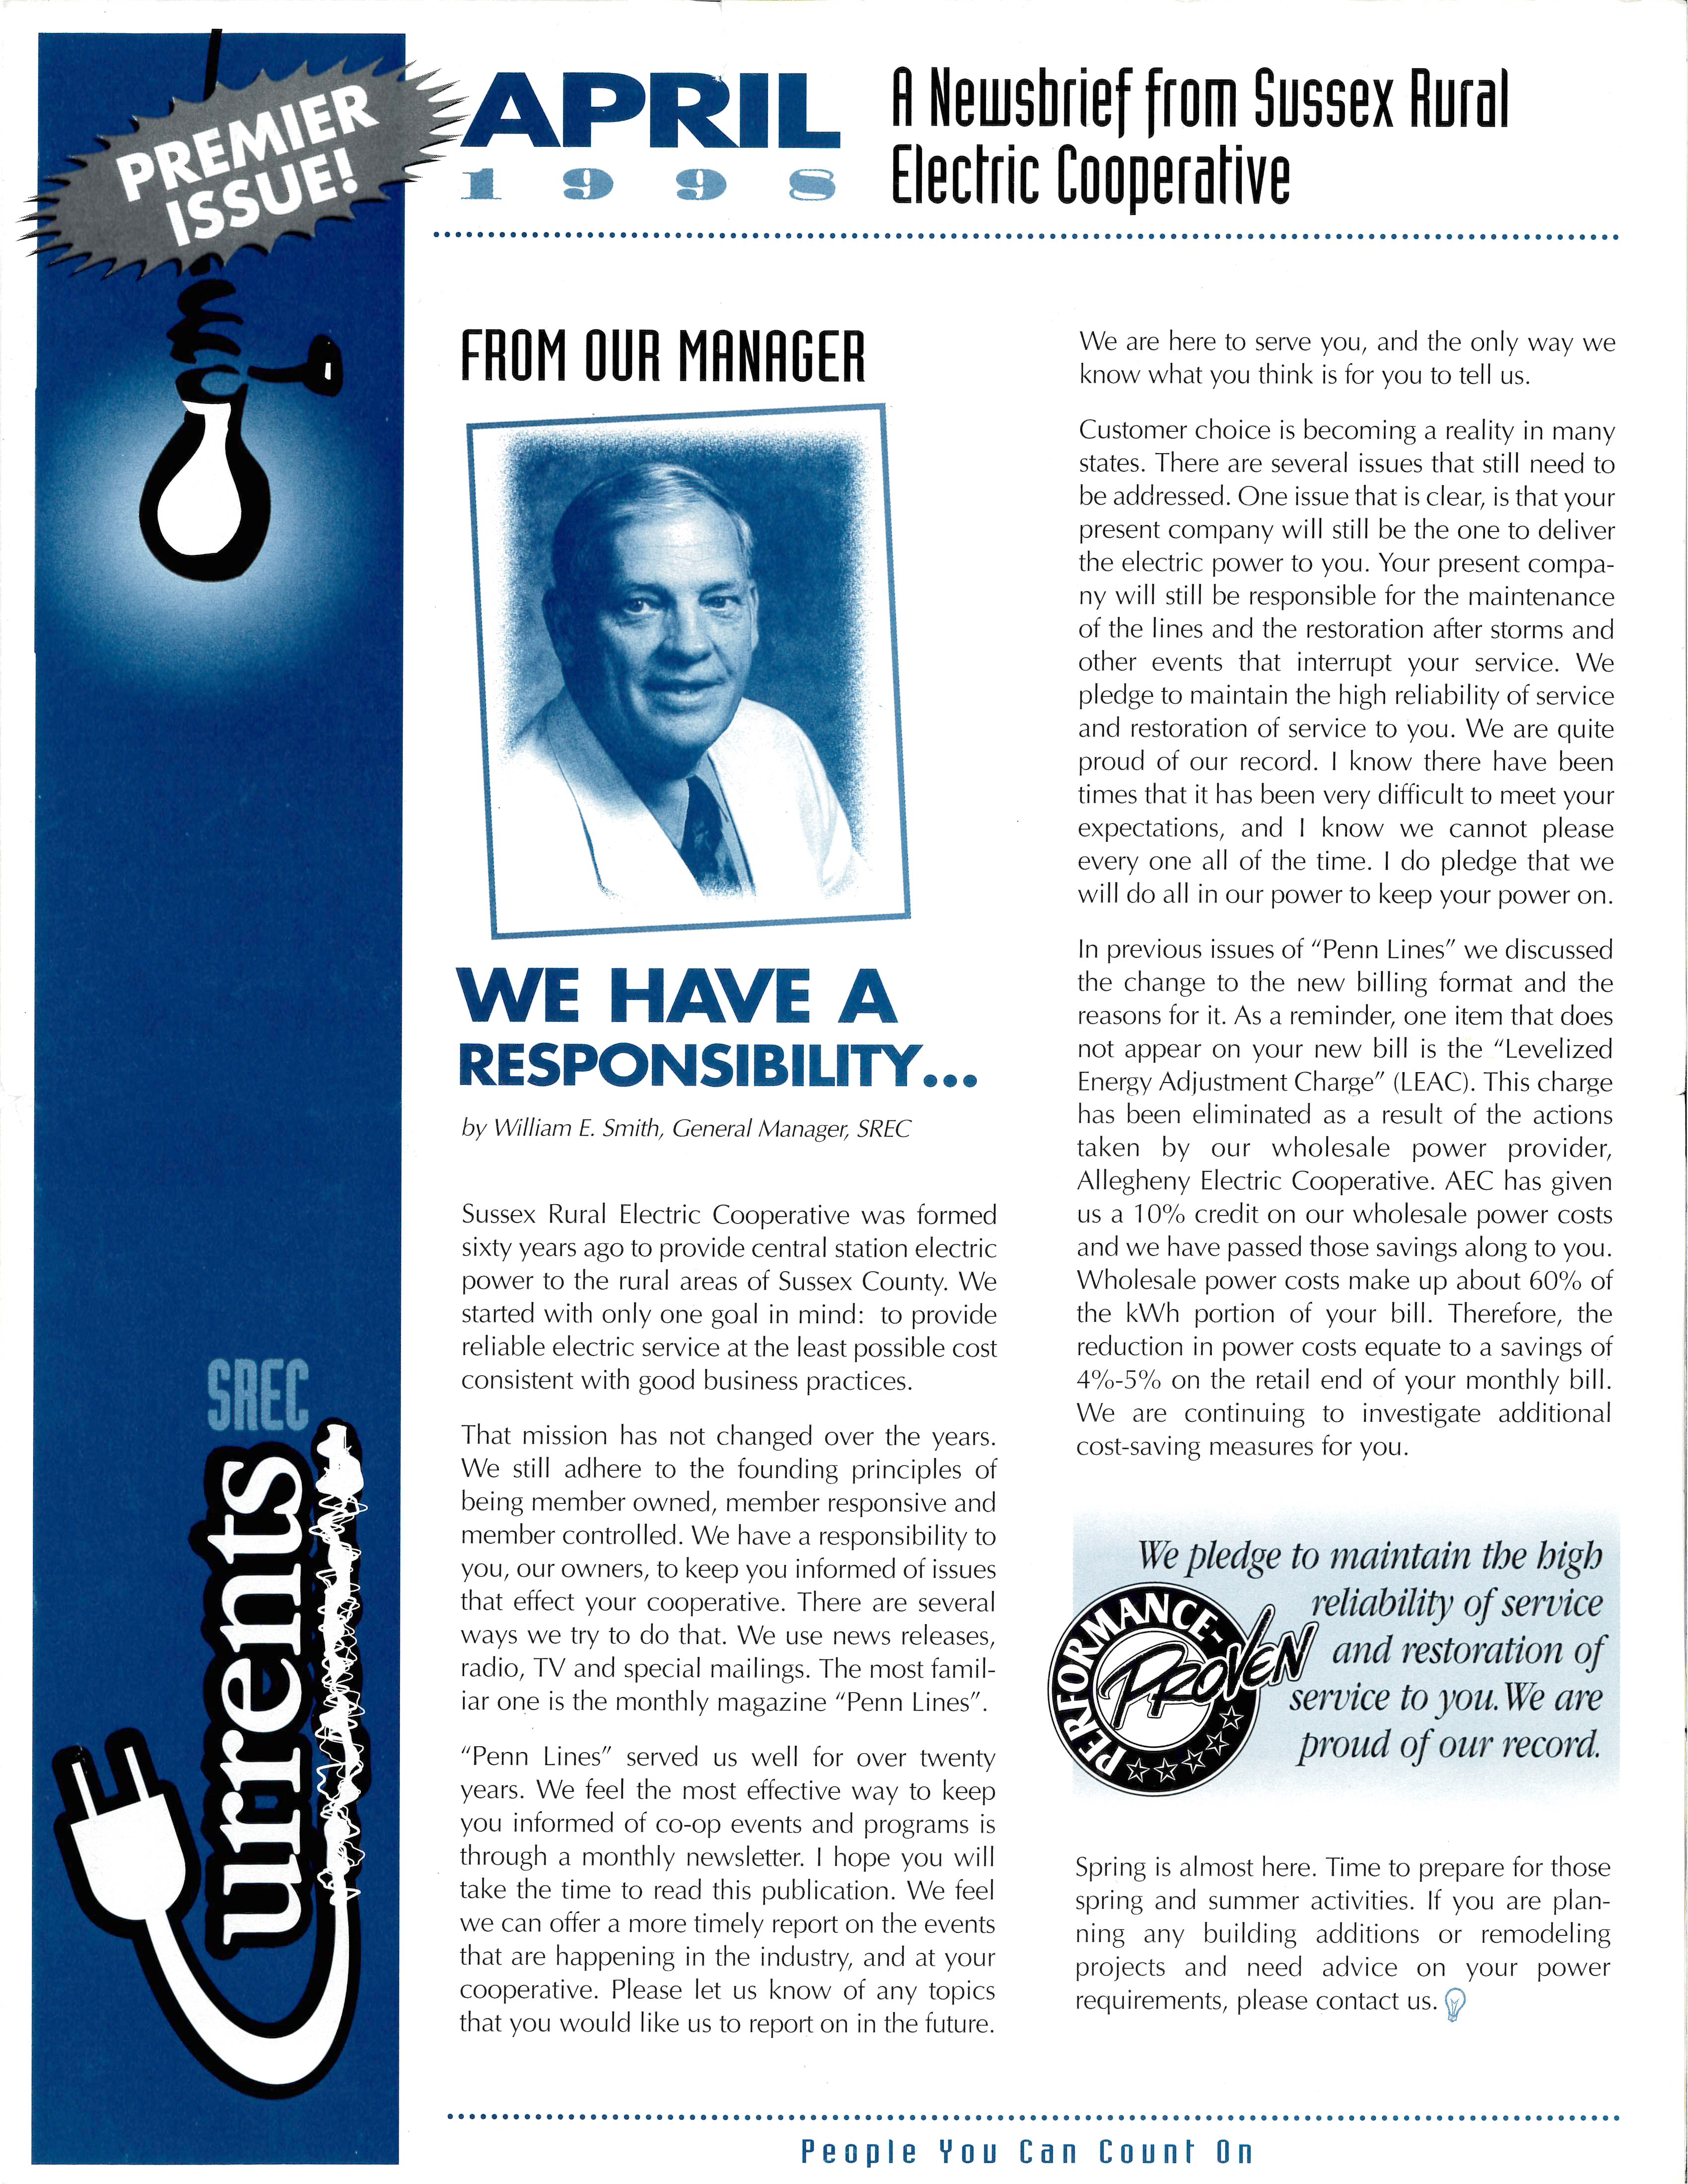 Pictured: The front page of the first issue of SREC's monthly newsletter, Currents. This first issue was published in 1998 under President/CEO William E. Smith.